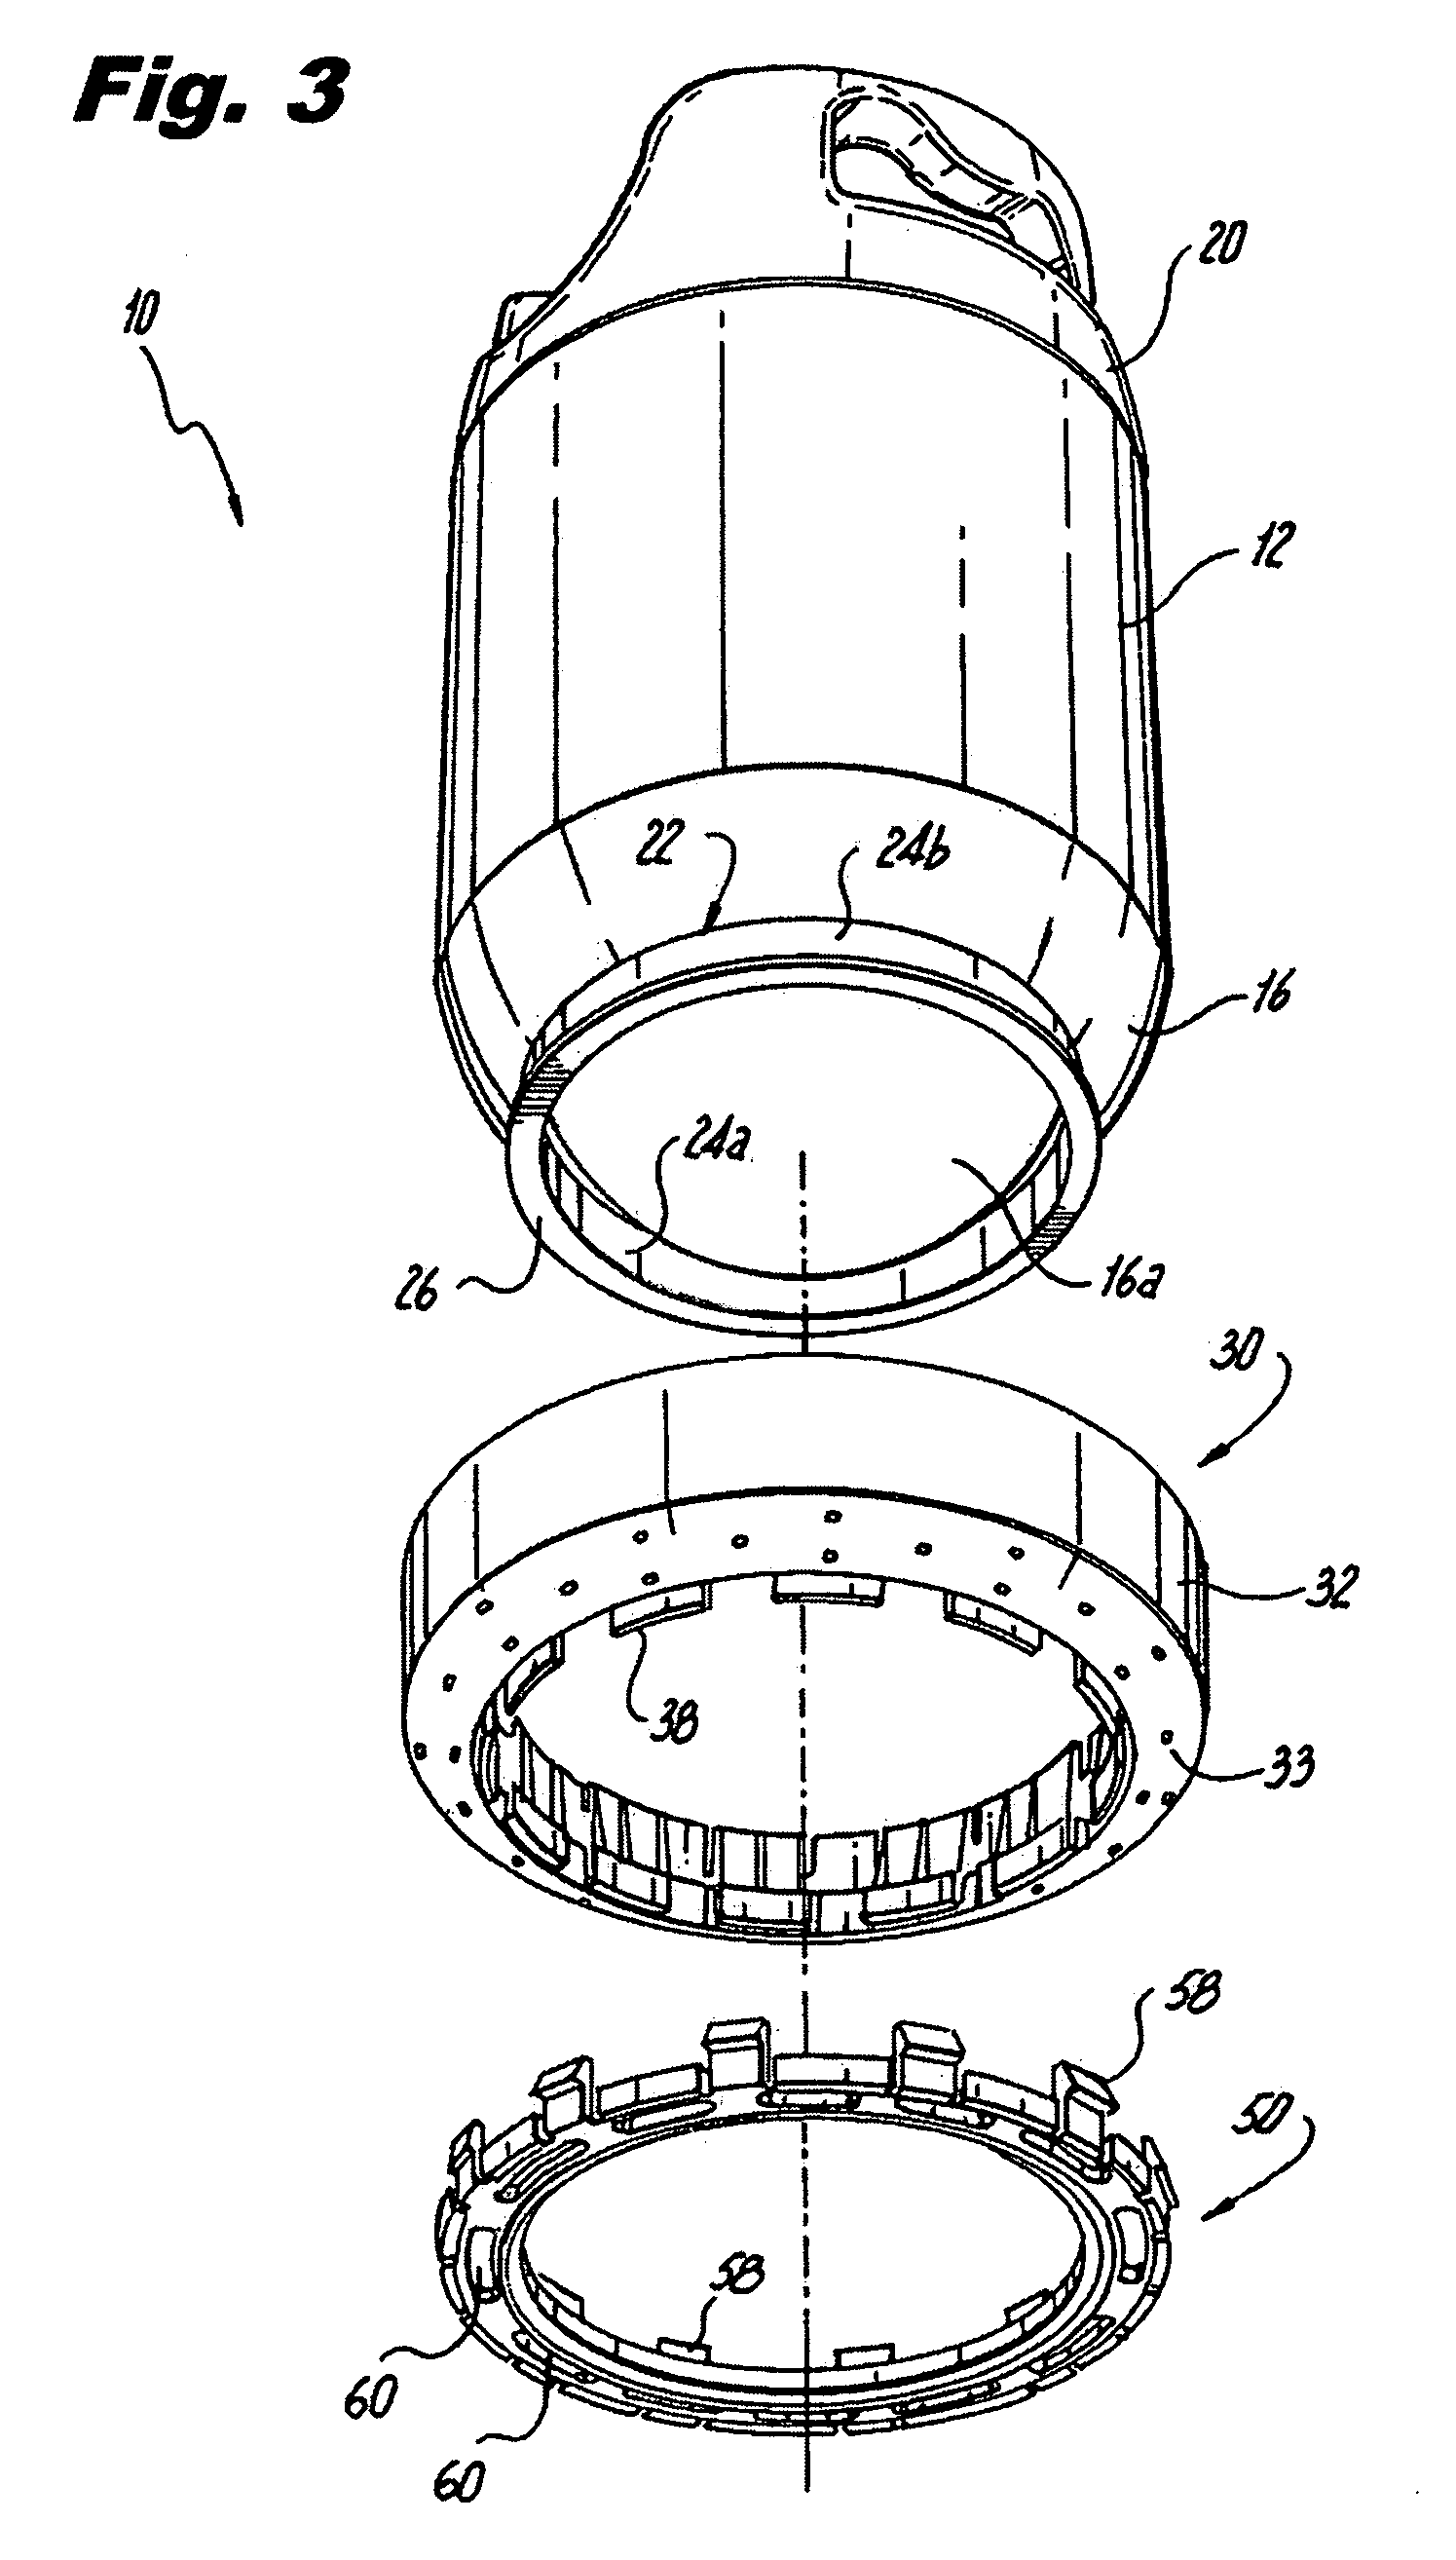 Compressed gas cylinder having conductive polymeric foot ring